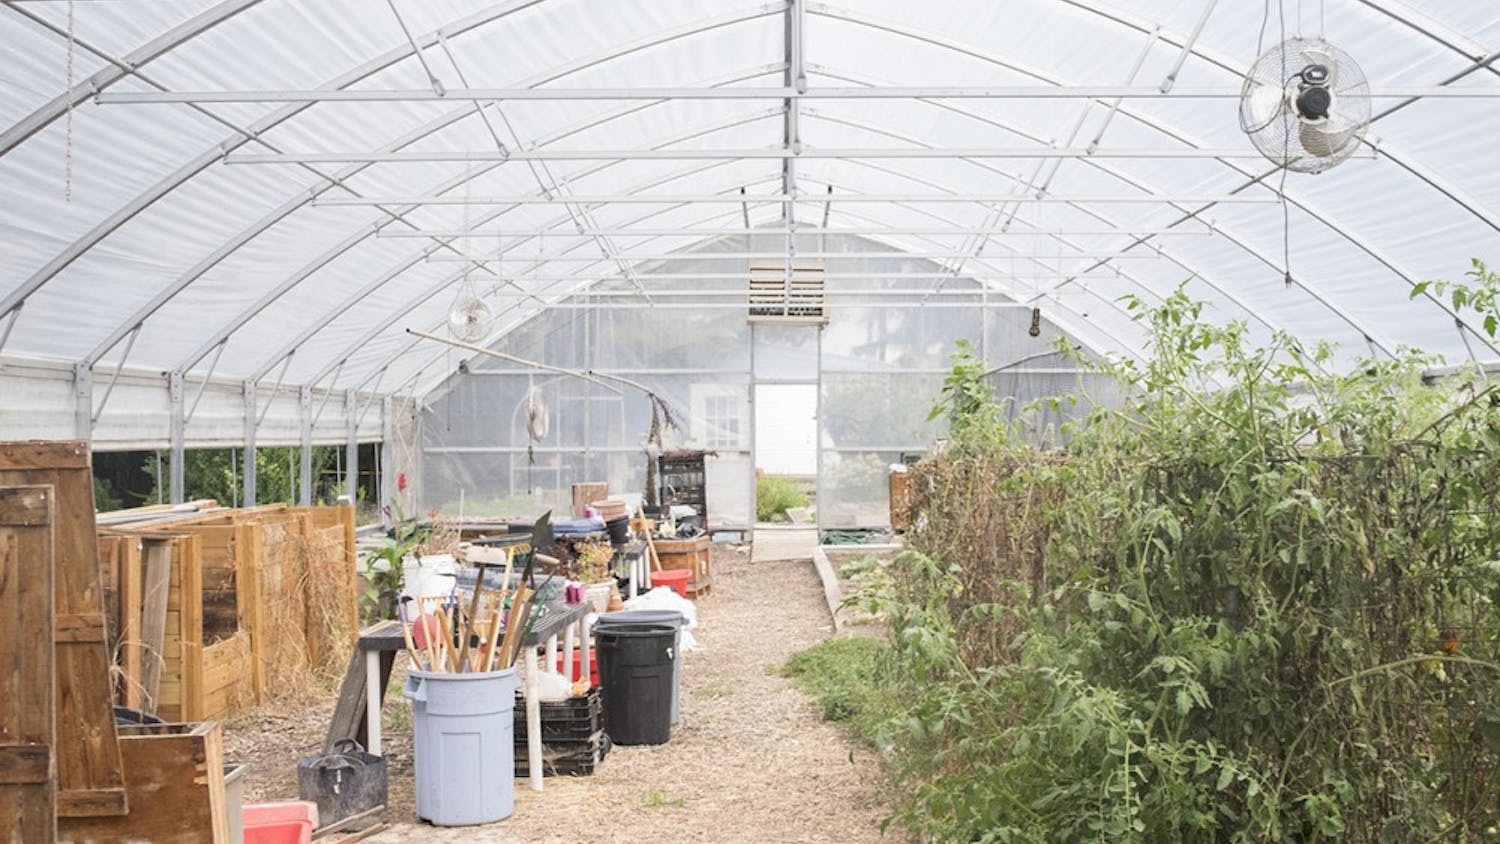 A greenhouse shelters equipment and plants at the Hilltop Garden. The garden allows students and the public to learn gardening practices and engage with nature.